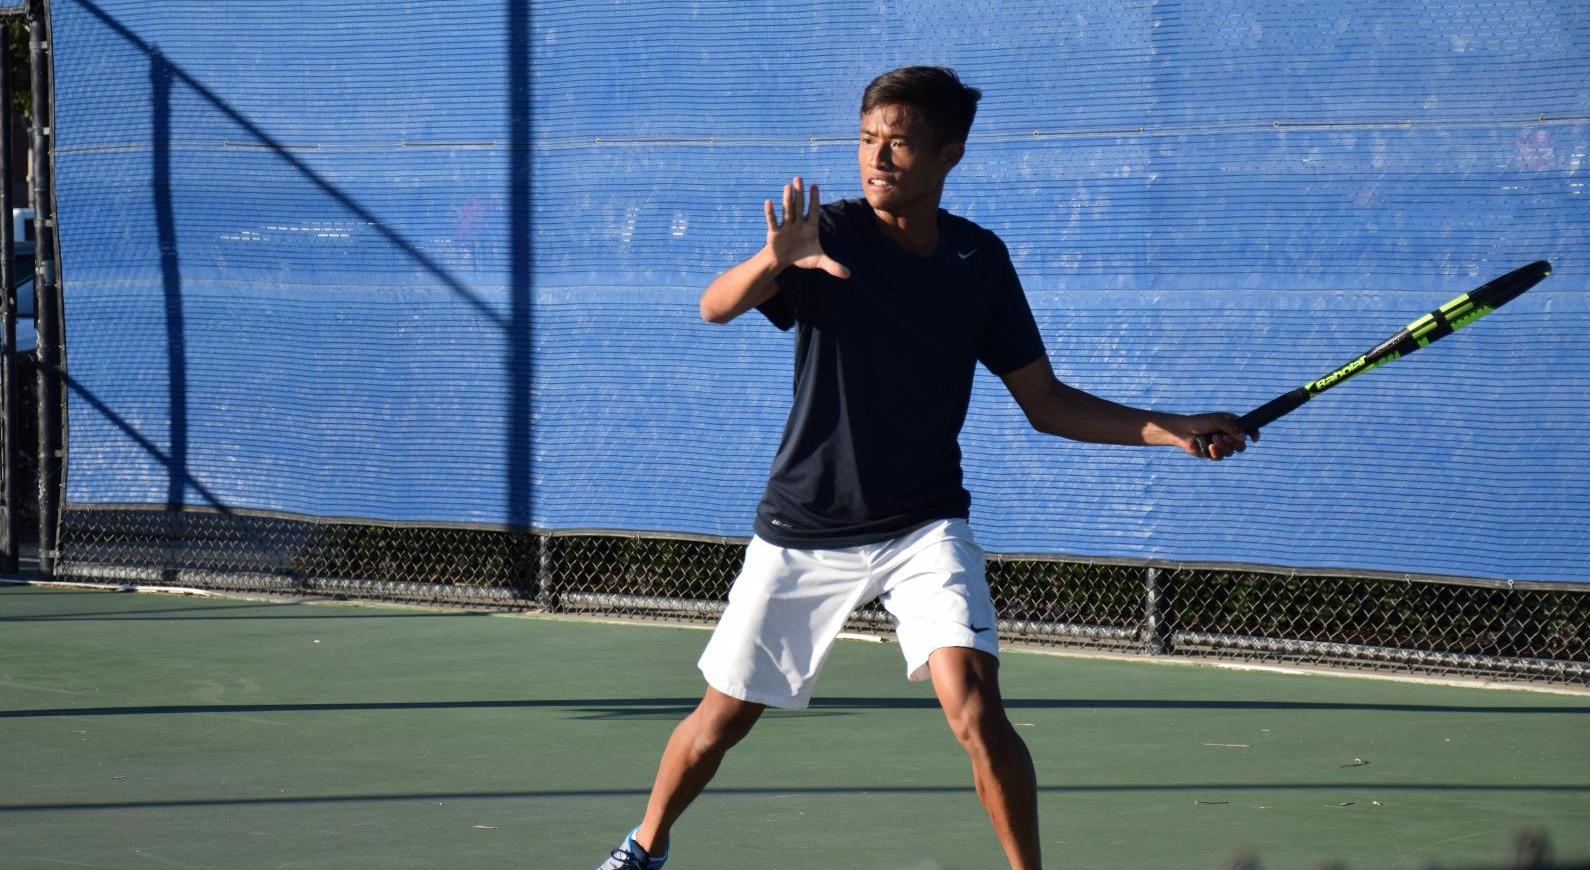 Men's tennis team wins at Riverside, moves closer to title